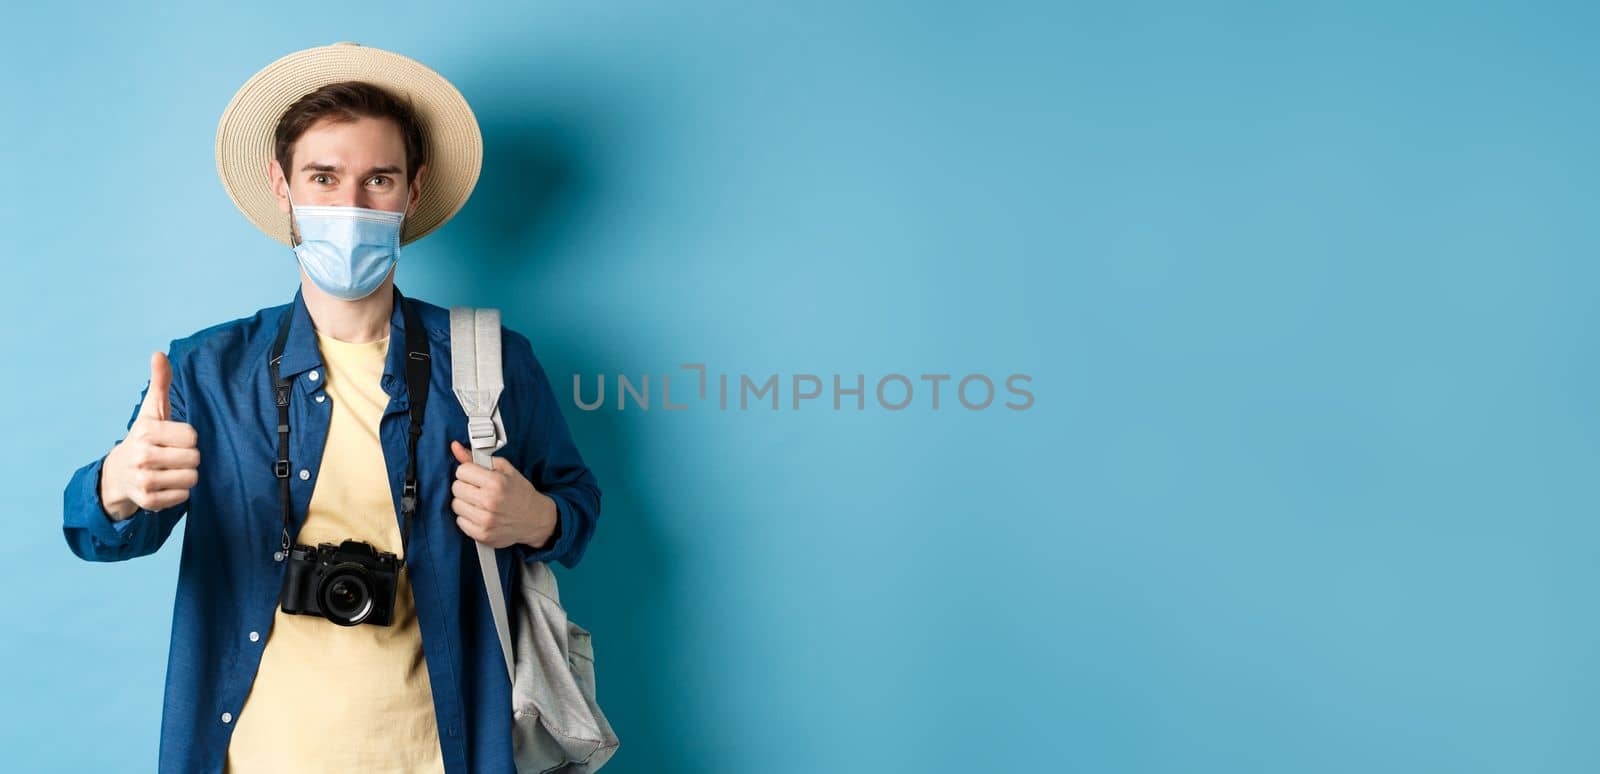 Covid-19 and summer holidays concept. Smiling guy travelling in medical mask and straw hat, backpacking and showing thumbs up, approve and praise travel agency, blue background.